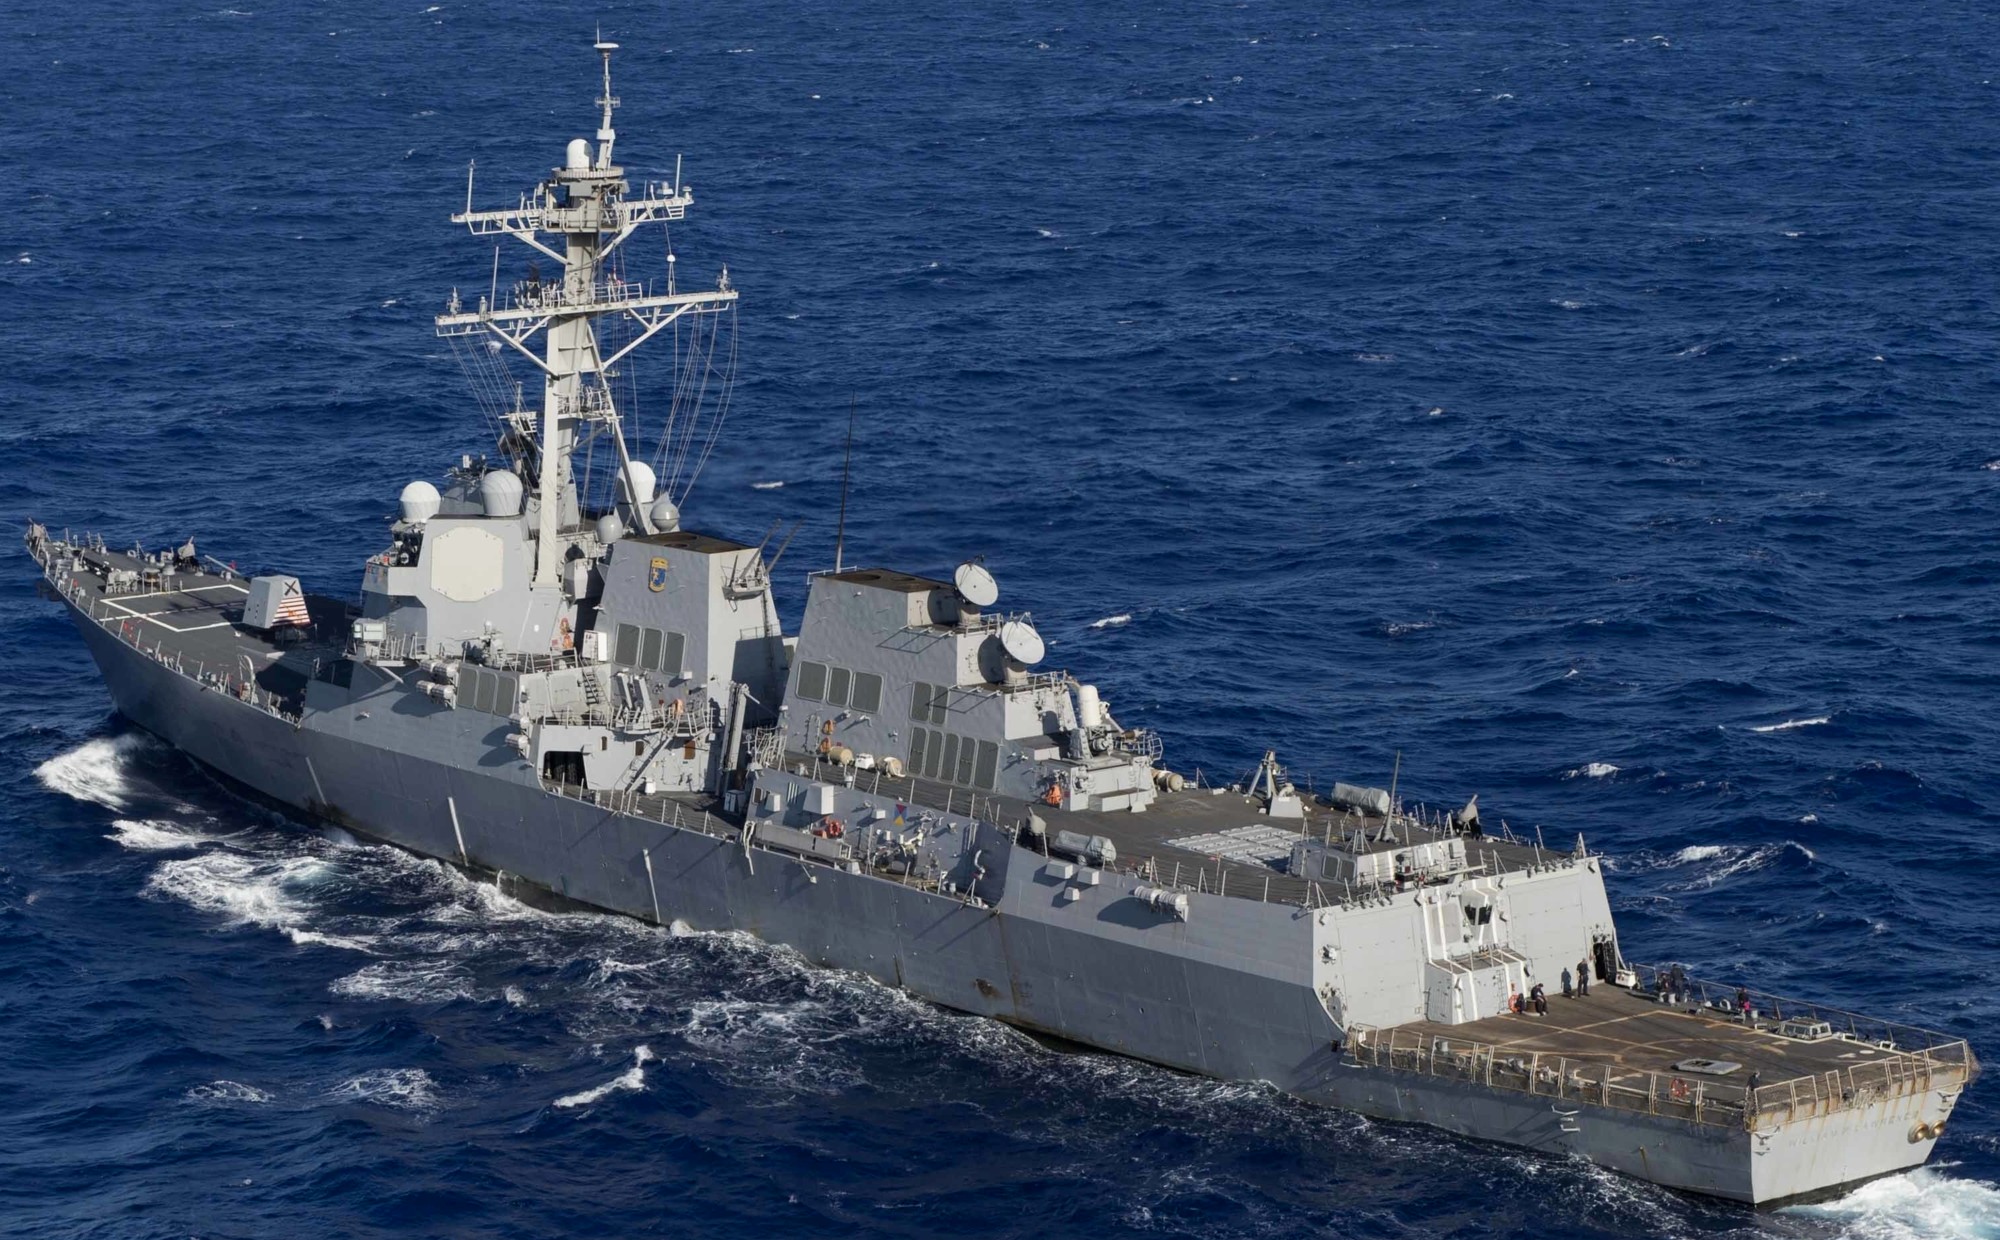 ddg-110 uss william p. lawrence arleigh burke class guided missile destroyer aegis us navy exercise rimpac 2016 30